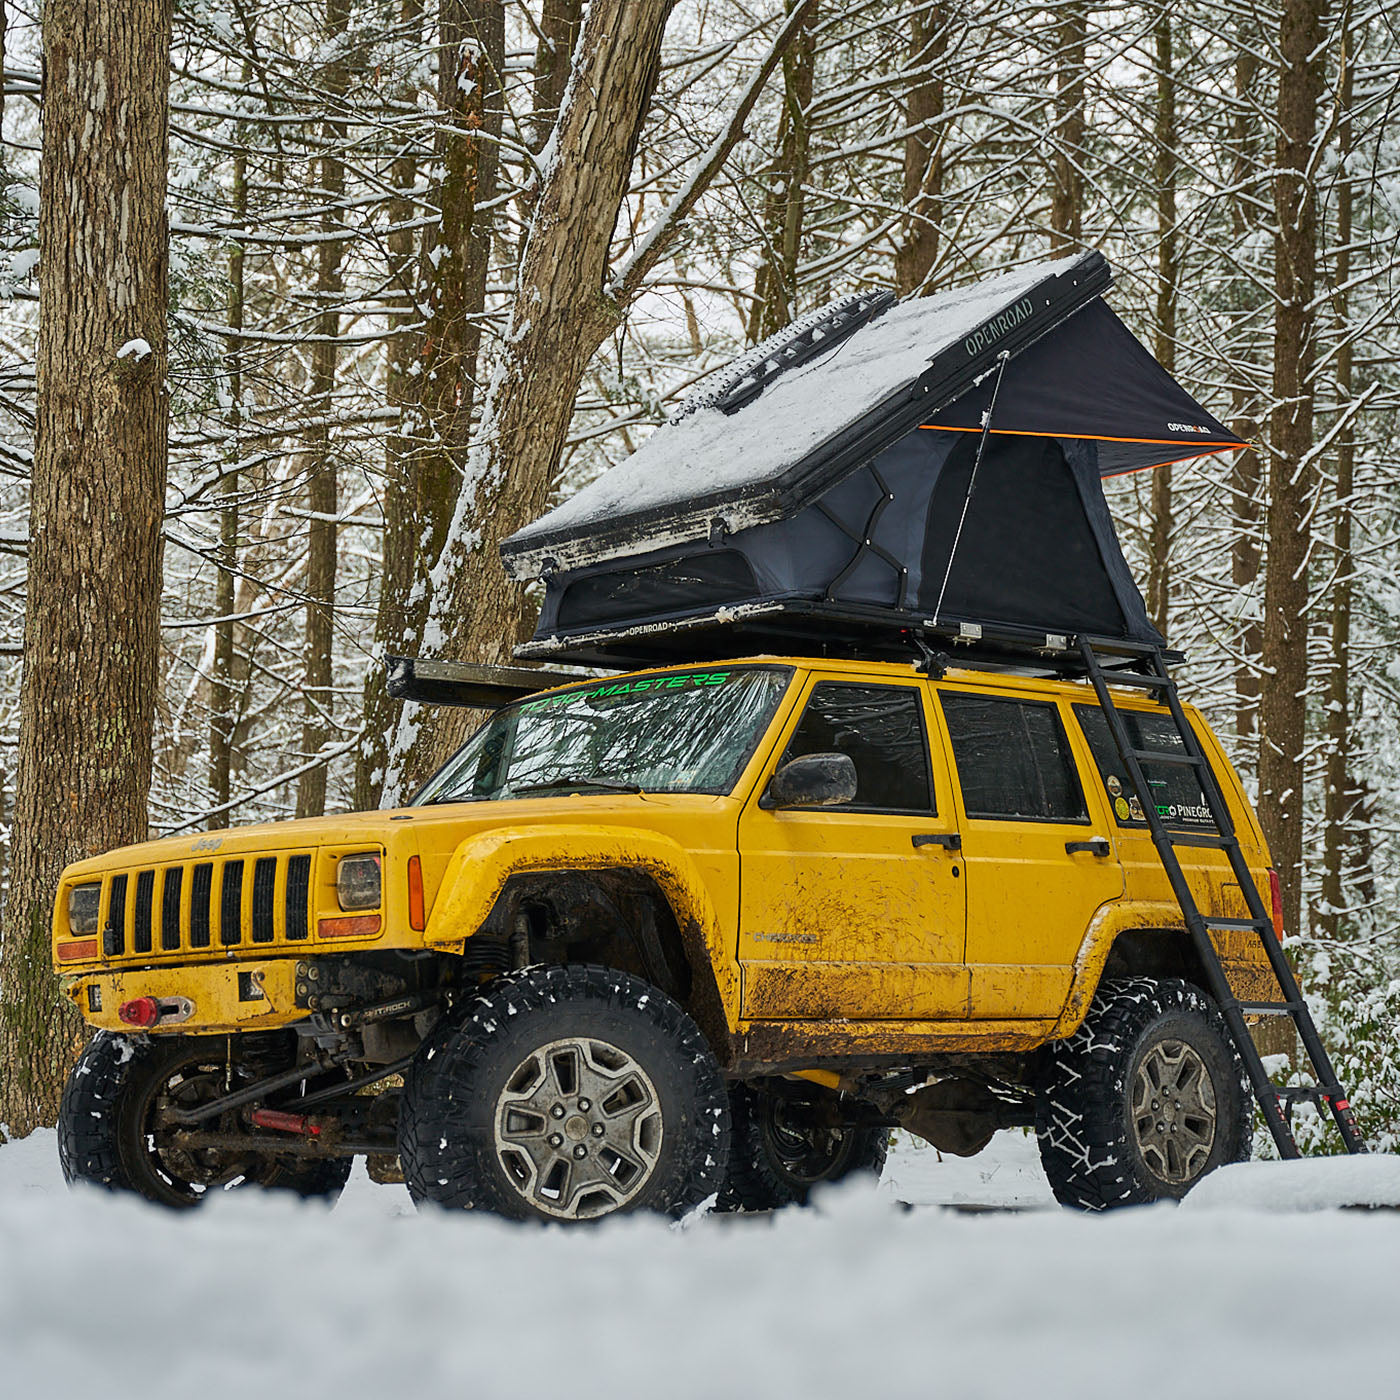 OPENROAD Hard Shell Roof Top Tent - PeakRoof Series  openroad4wd.com   